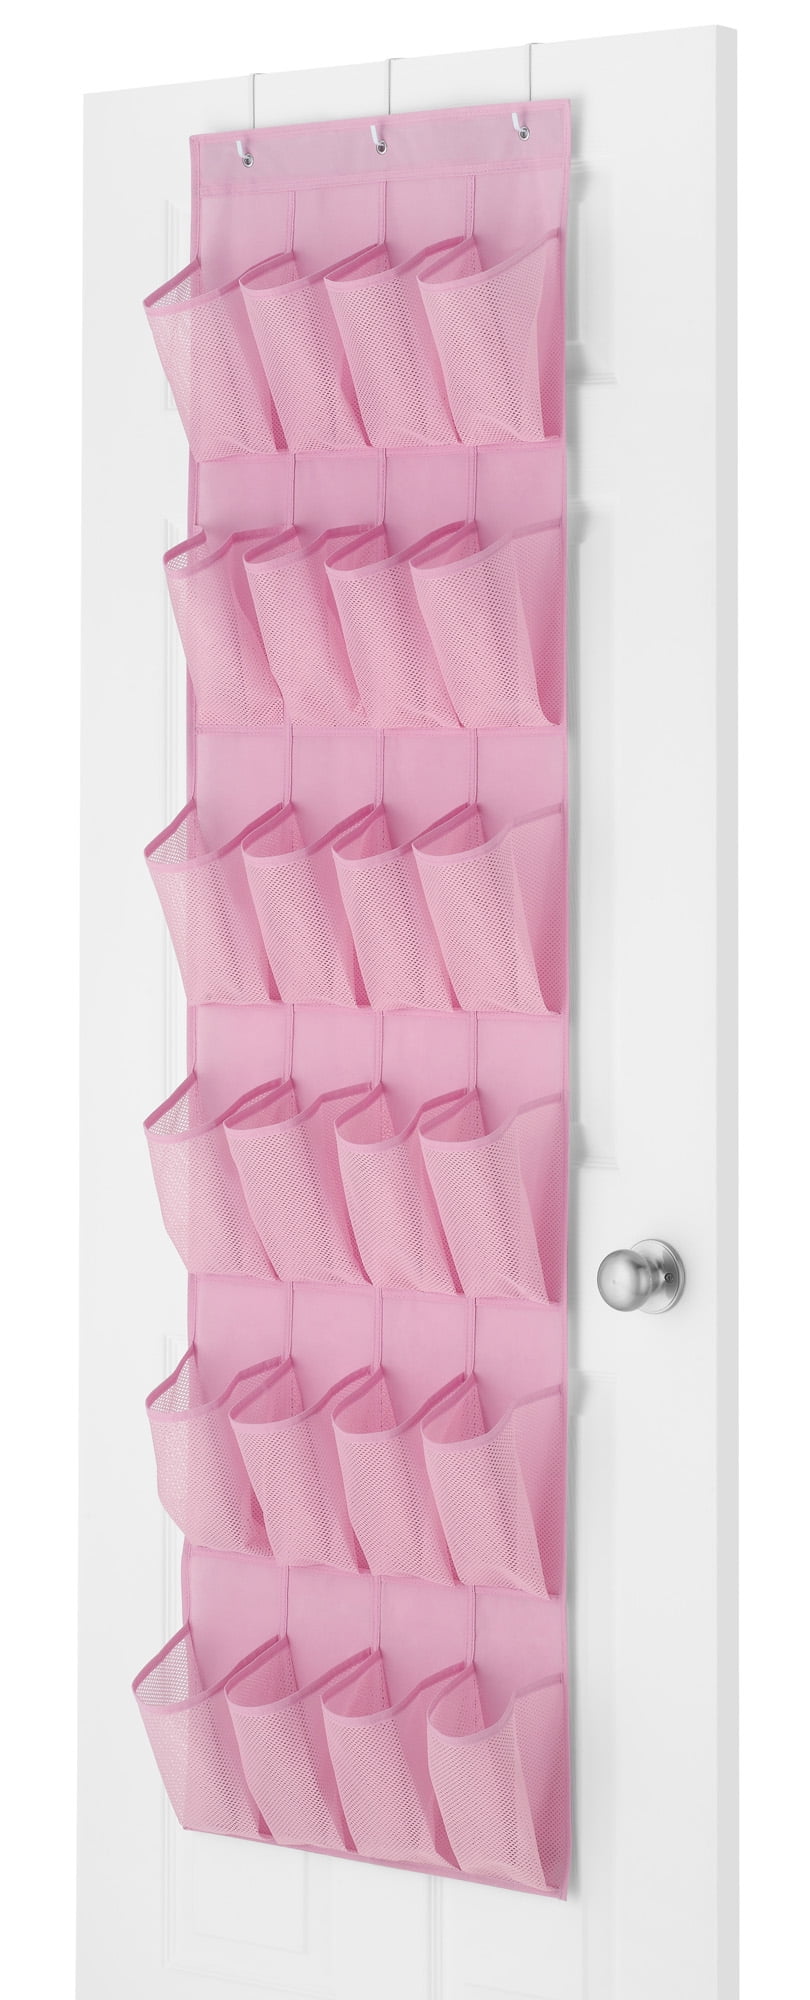 Whitmor Hanging Accessory Shelves - Pink